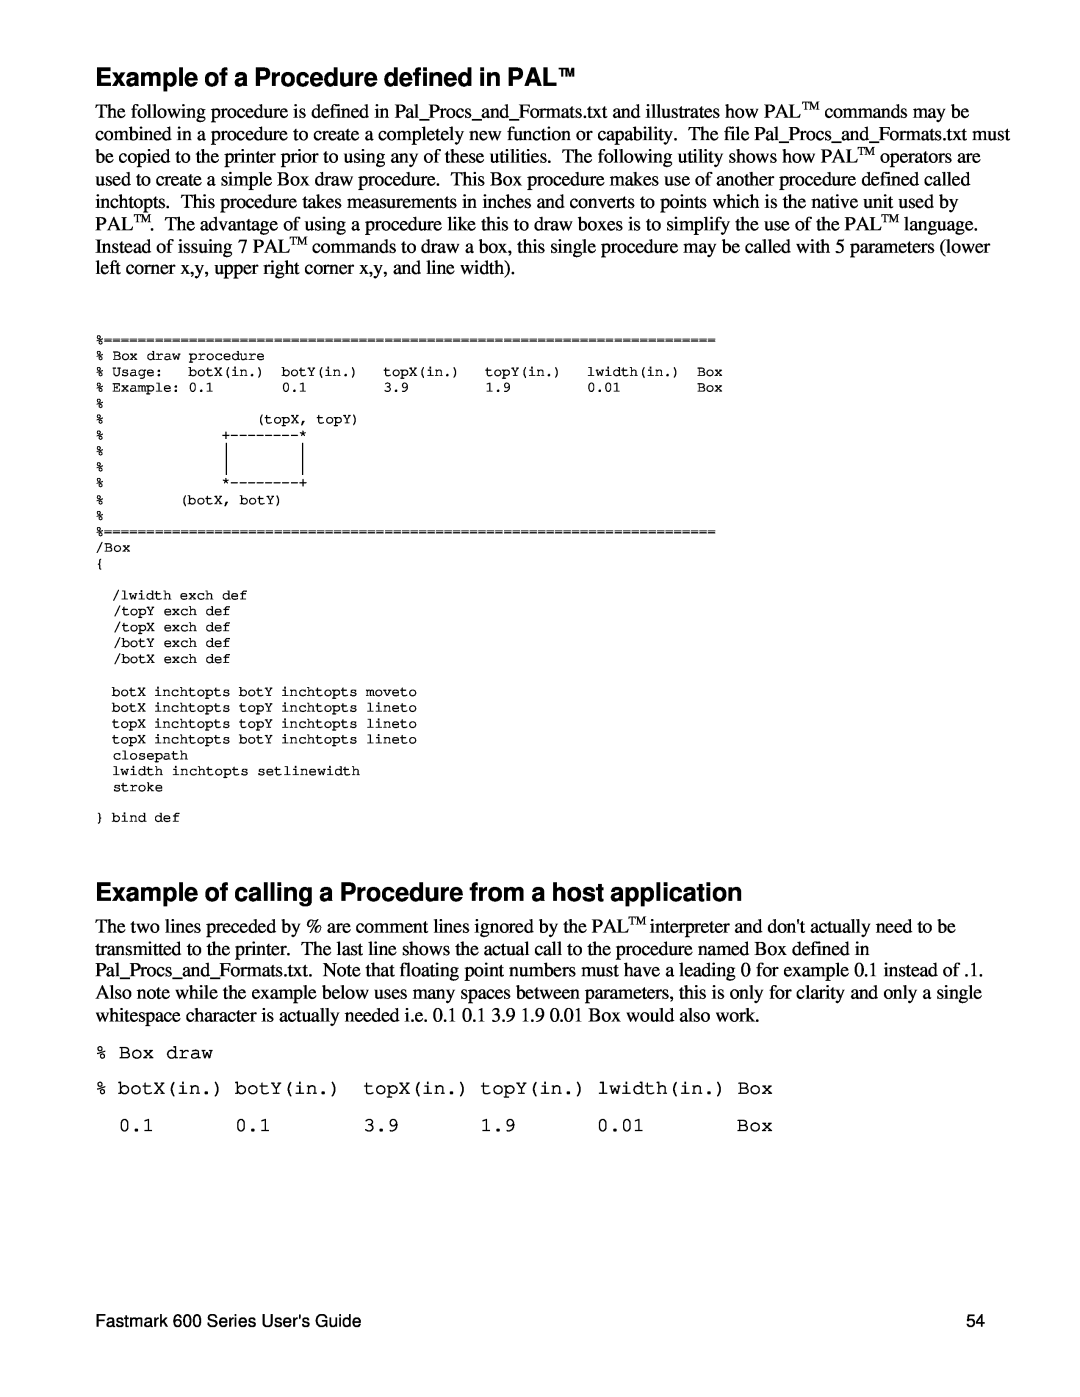 AMT Datasouth 600 manual Example of a Procedure defined in PALTM, Example of calling a Procedure from a host application 